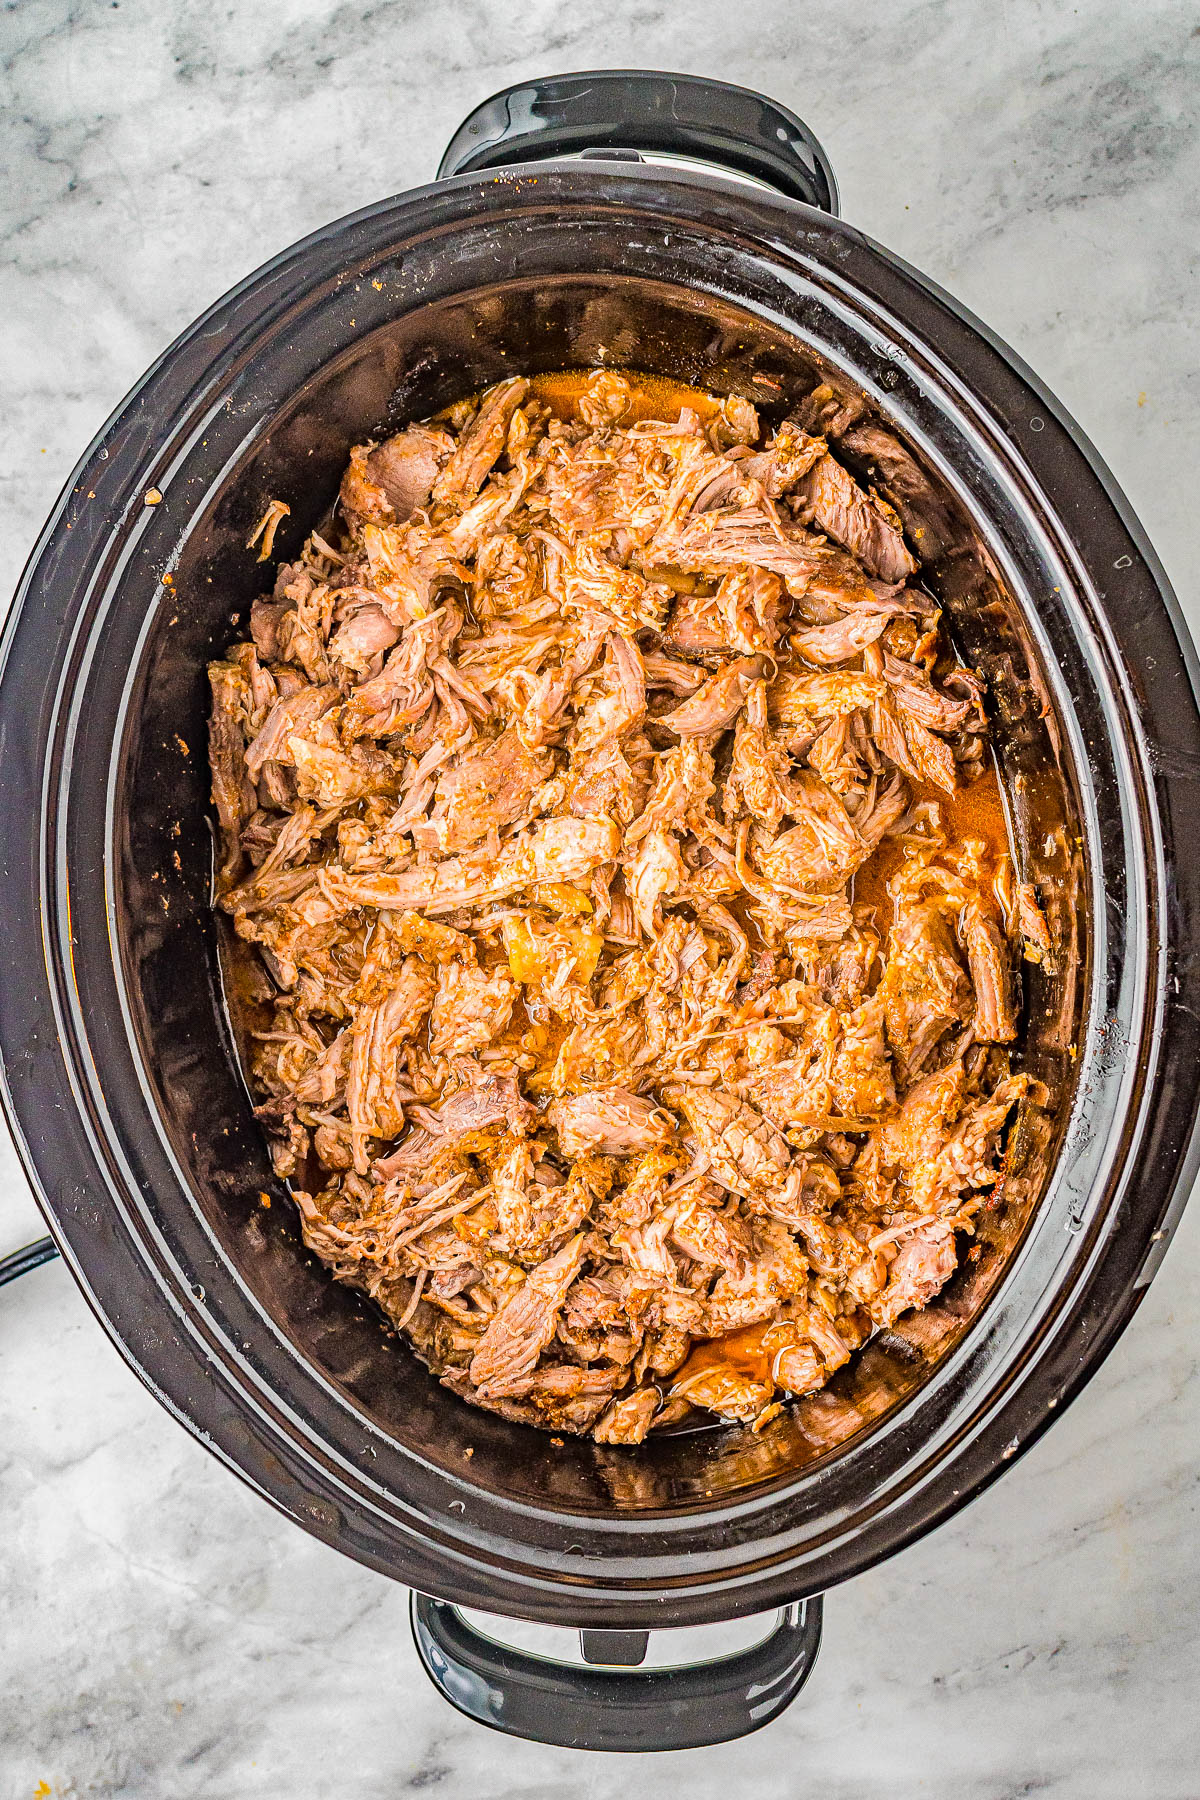 Slow Cooker Pulled Pork - The EASIEST recipe for pulled pork because your Crock-Pot does all the work for you! Set it and forget it for this AMAZING pulled pork that's super flavorful and so tender and juicy! Great for pulled pork sandwiches and tacos!